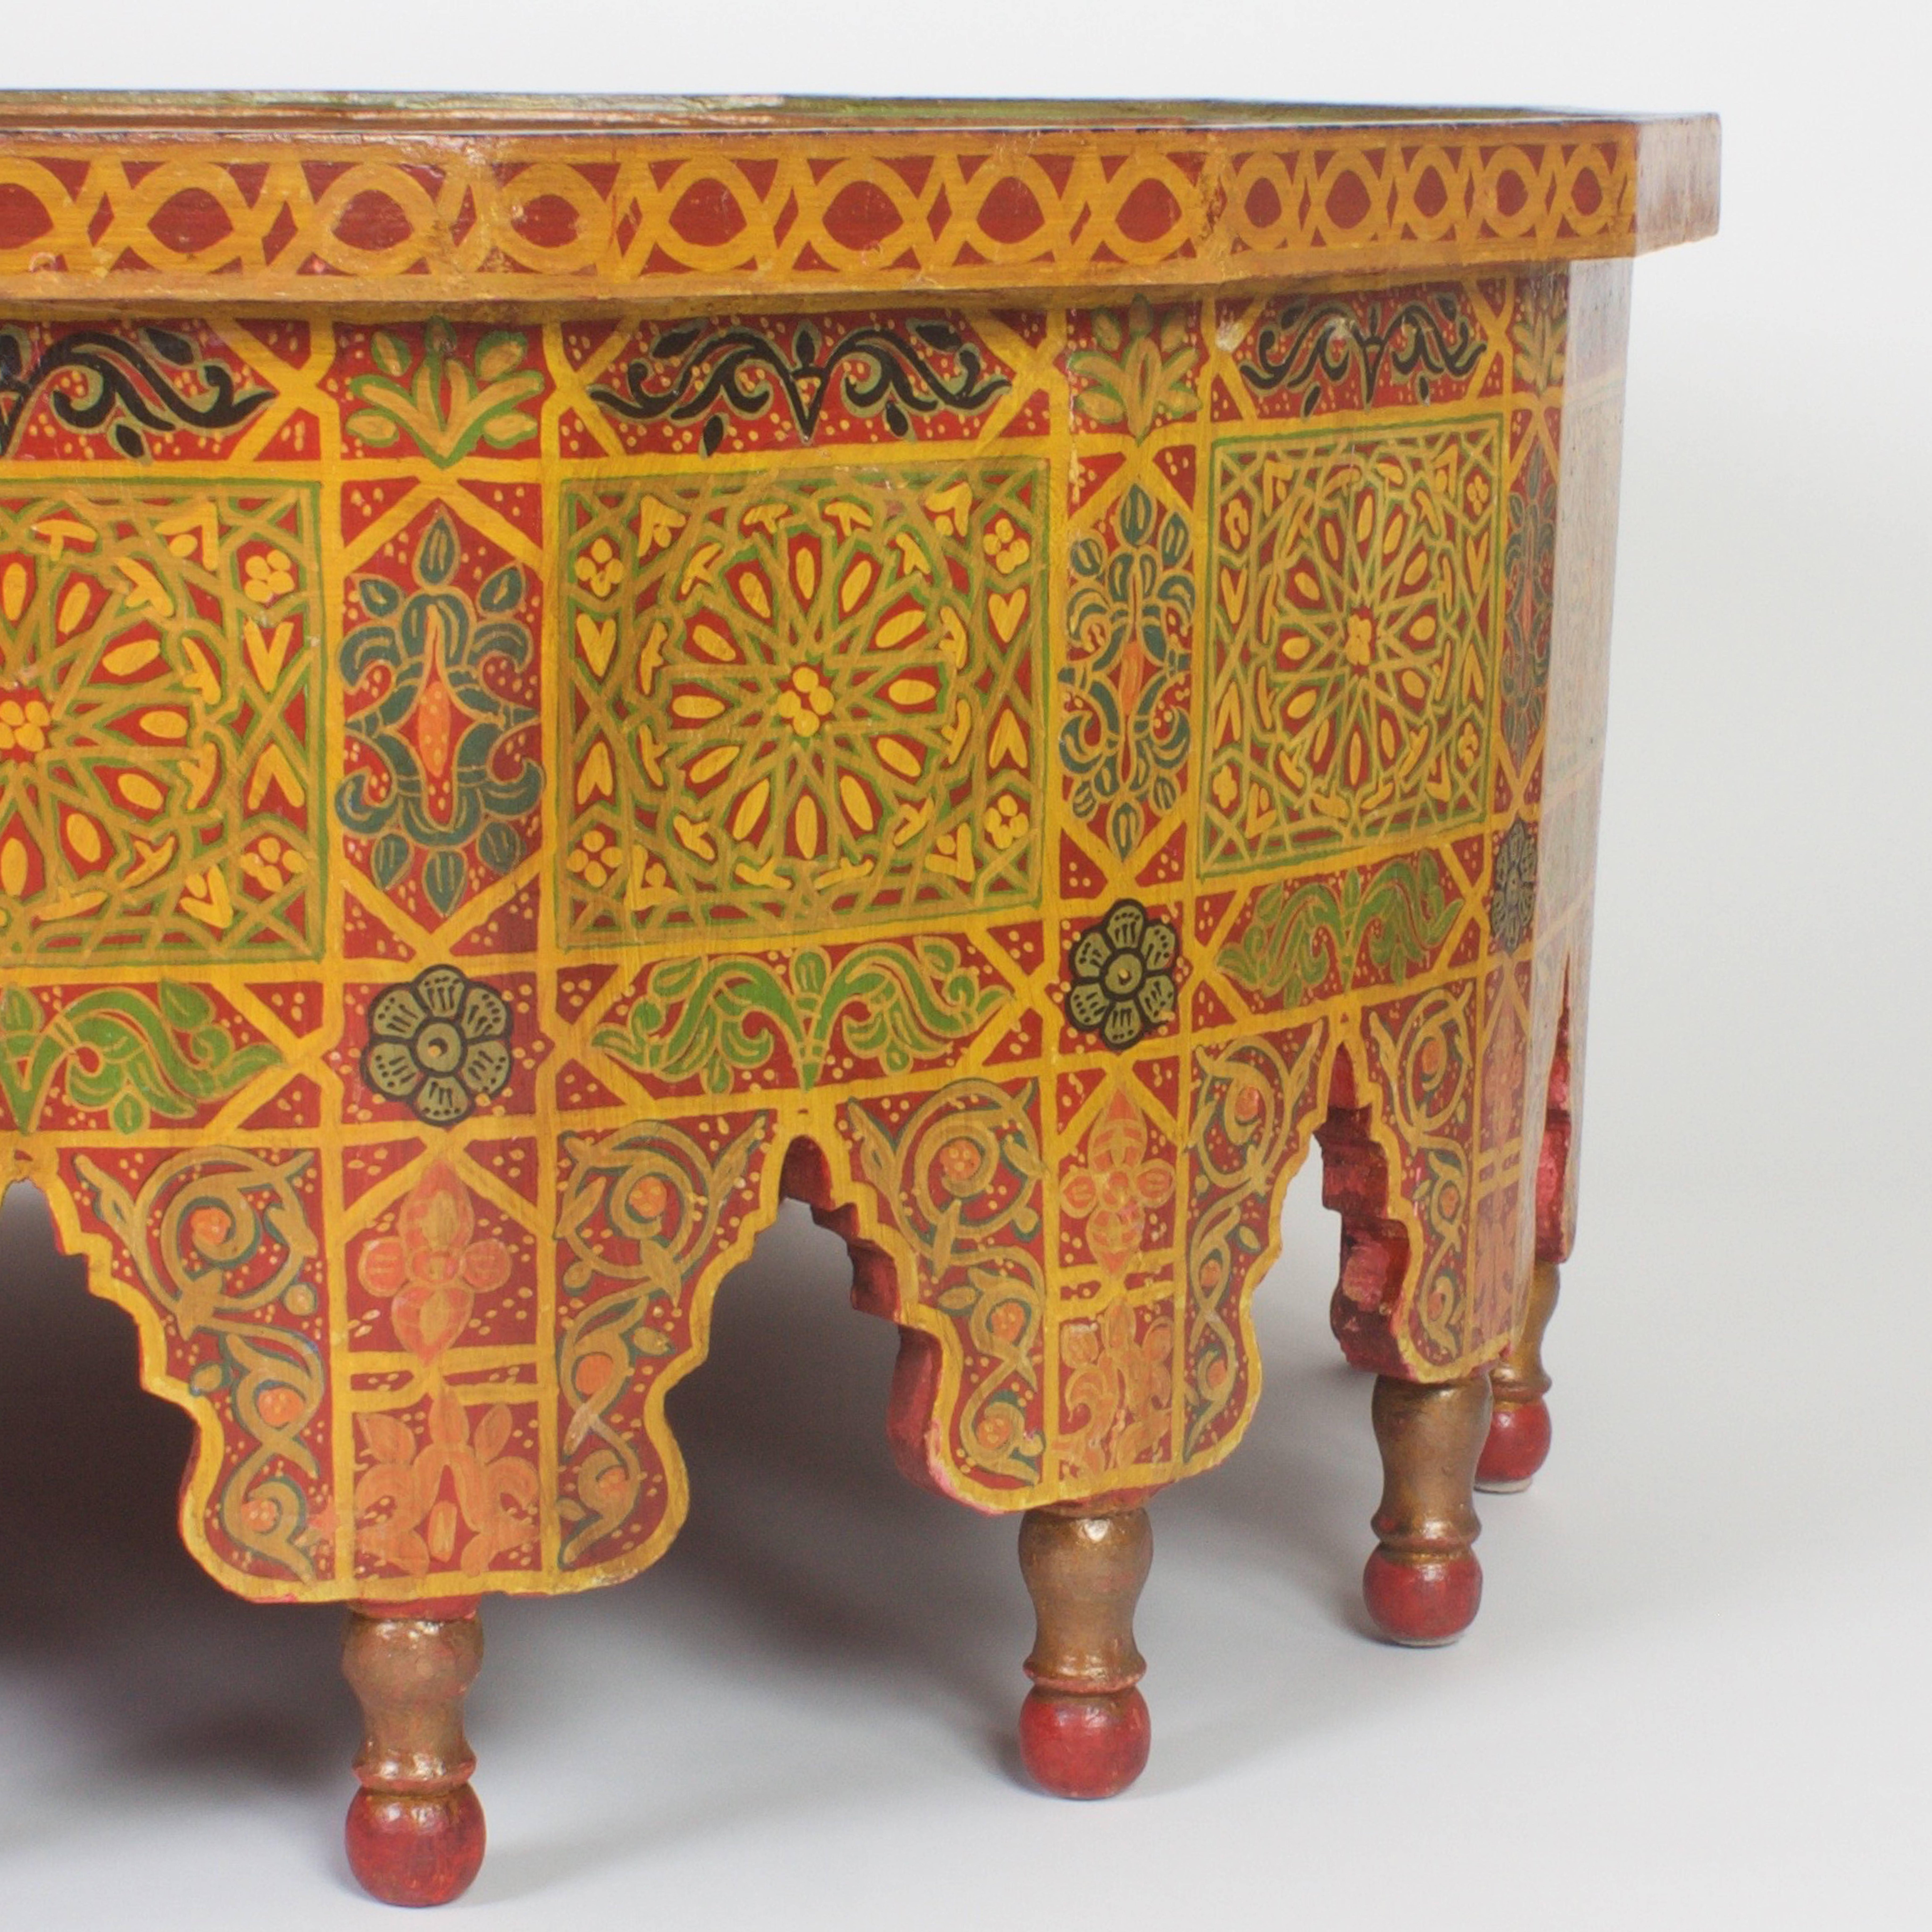 Moorish Vintage Large Hand Decorated Moroccan Cocktail or Coffee Table